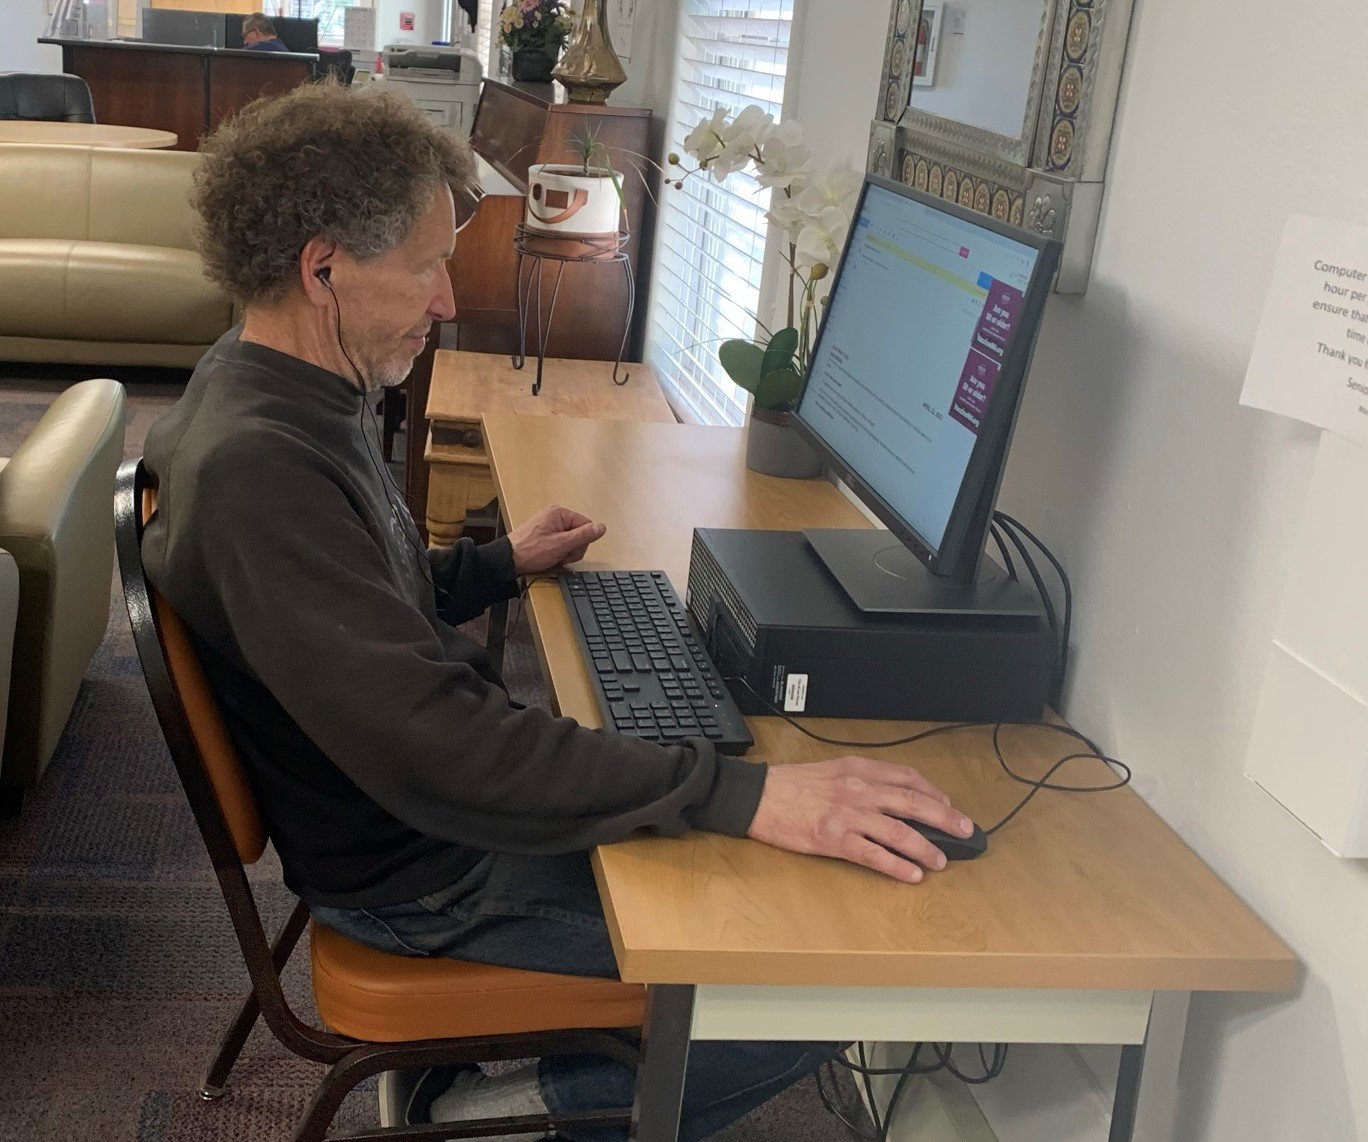 William Kolbin takes advantage of the Internet options at Eastside Senior Community Center on N. Tornillo Street where a Comcast lift zone is available for Wi-Fi connections.